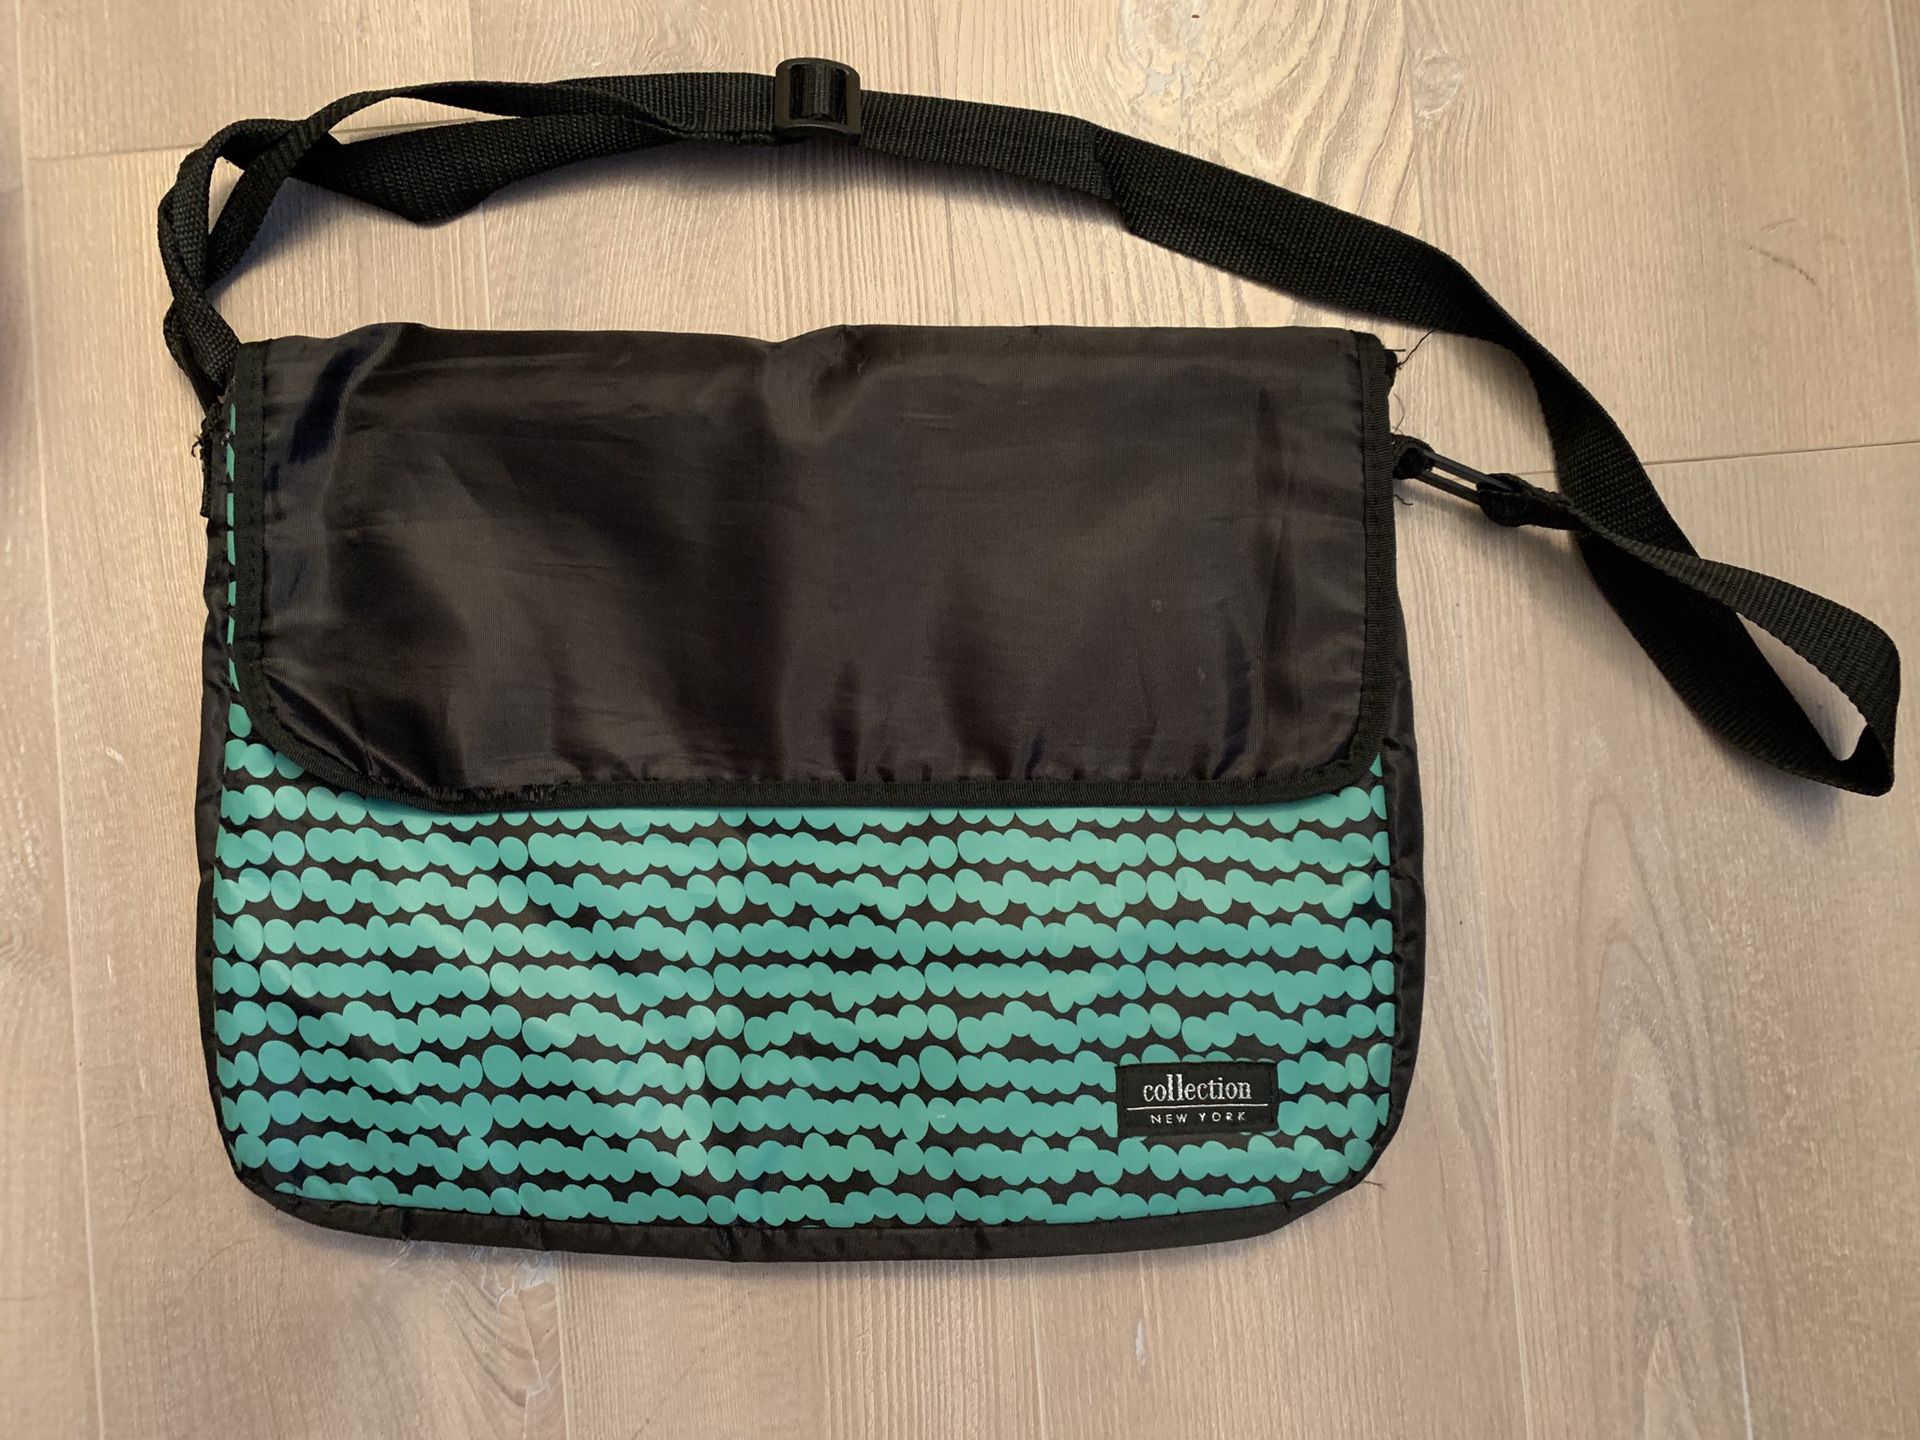 FREE SPOTTED TEAL LAPTOP CASE